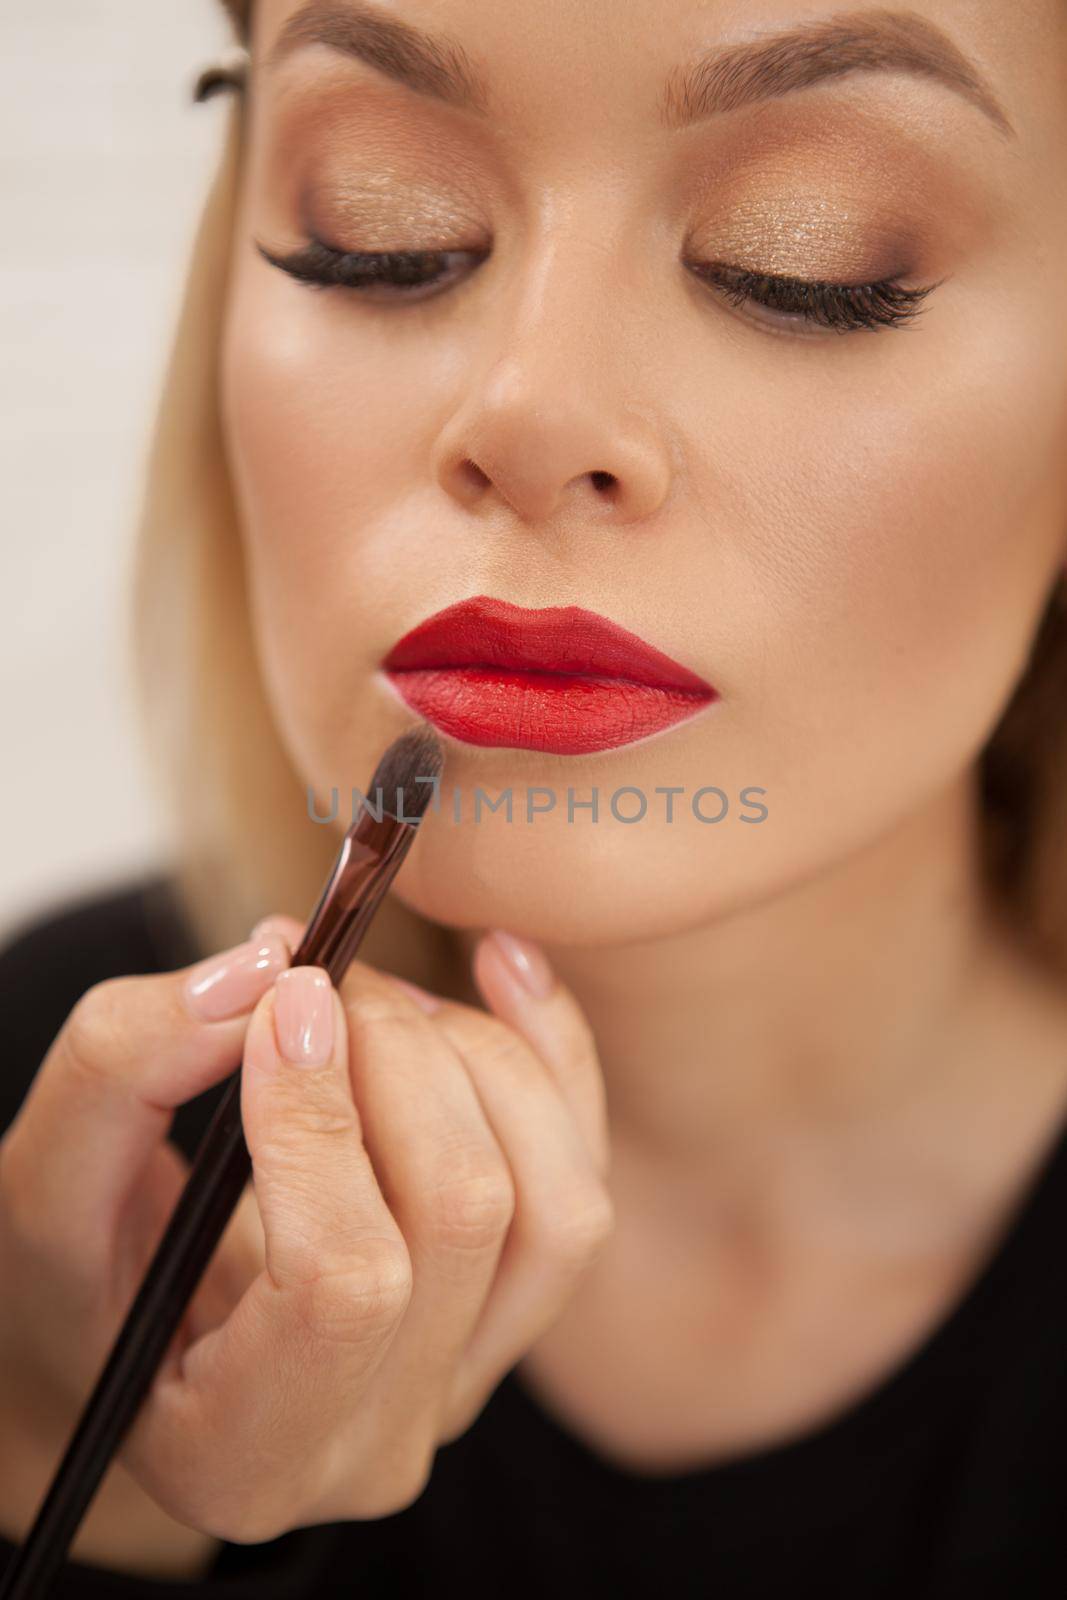 Vertical closeup of a beautiful woman having her lips painted with red lipstick